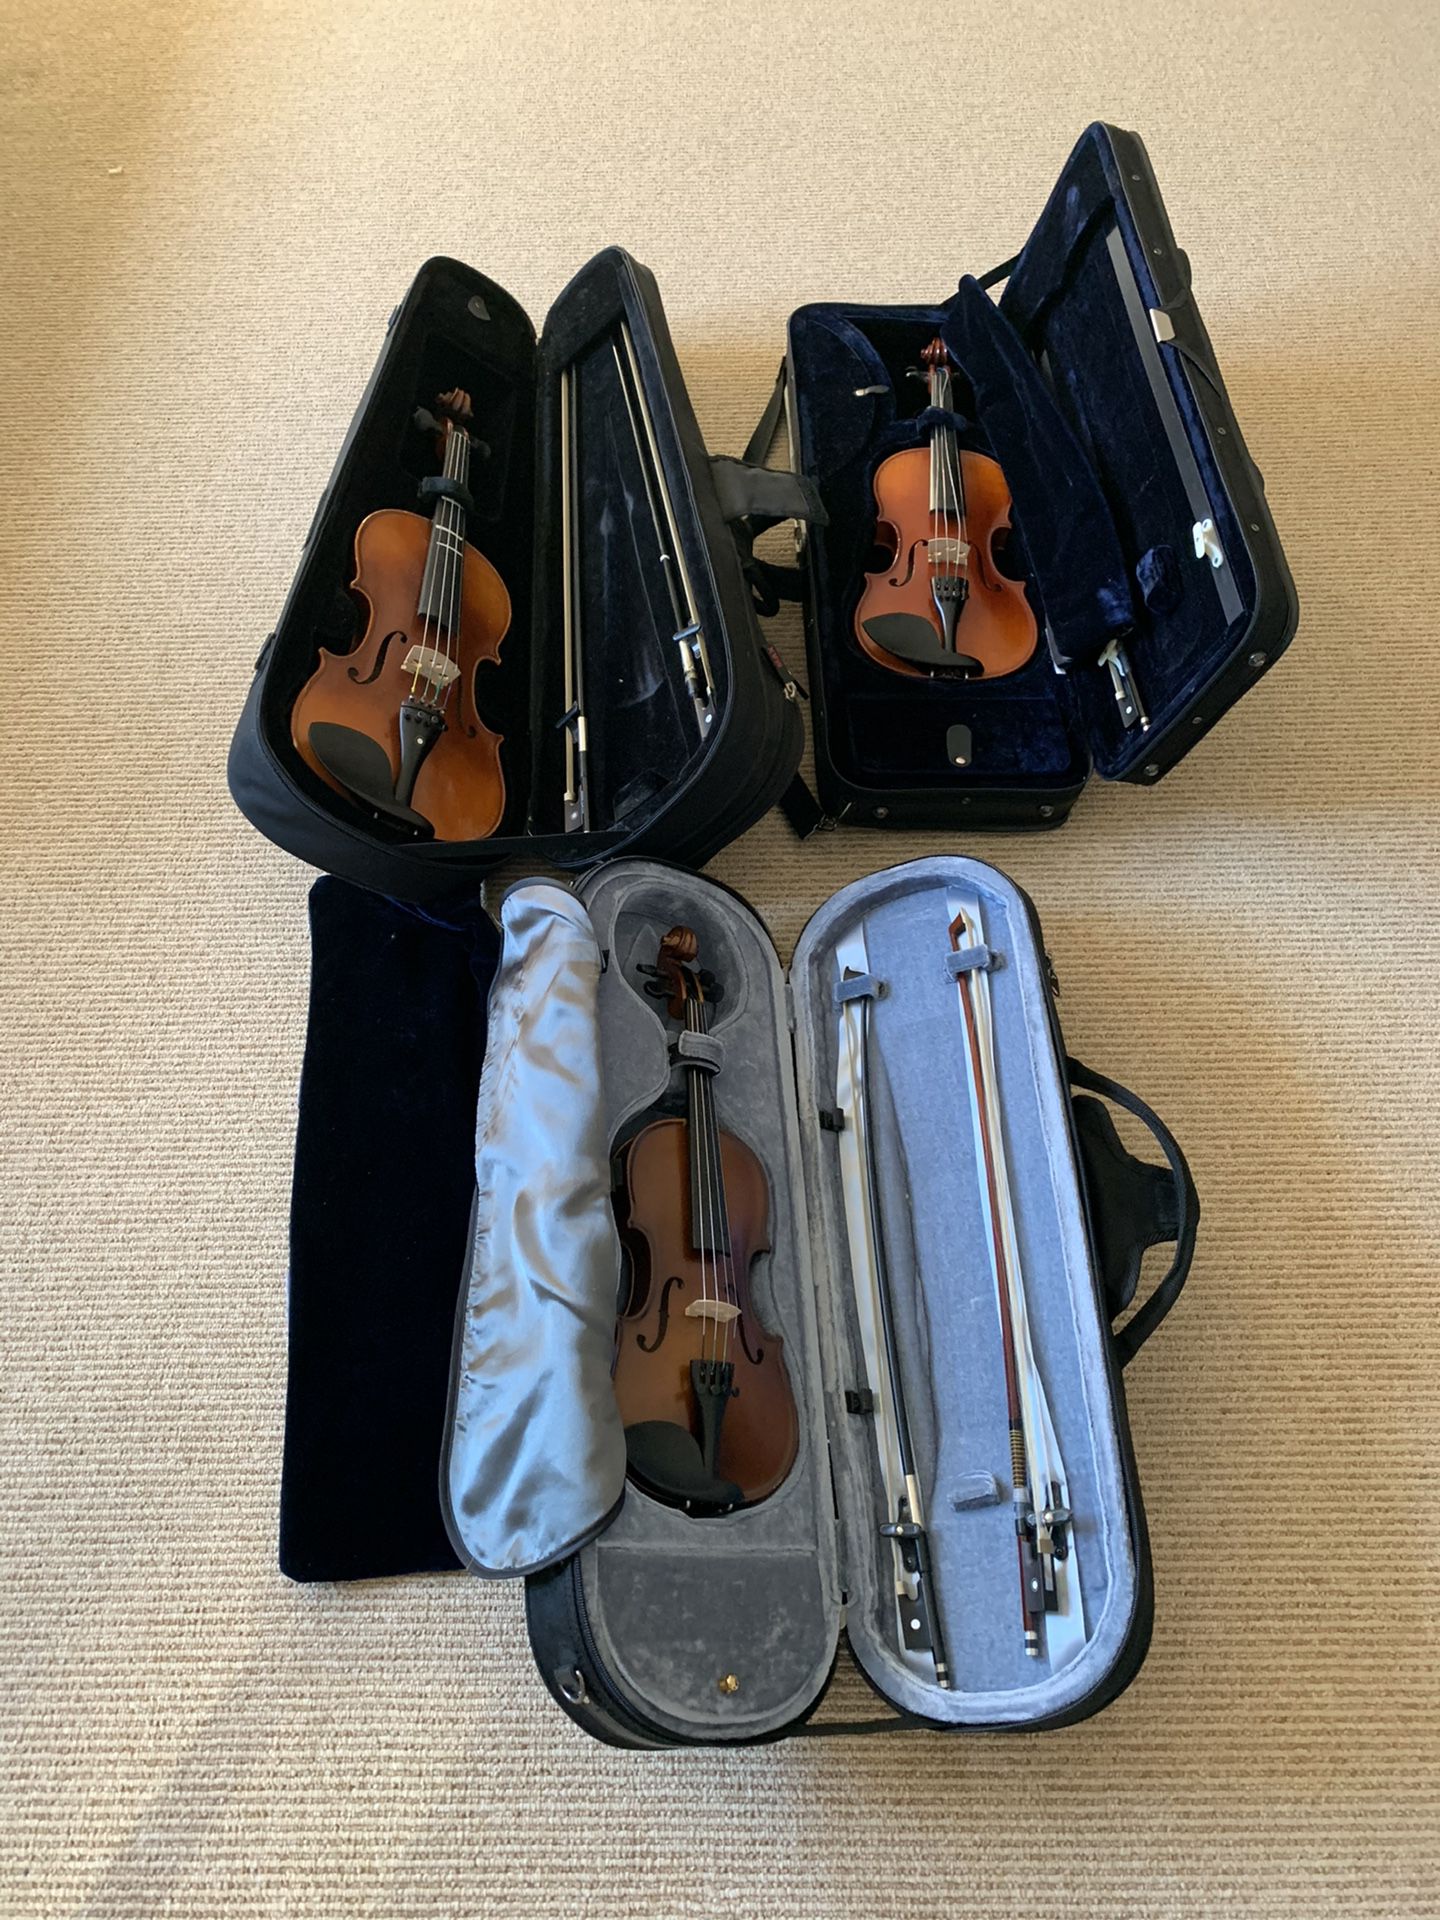 Three different size of Violins (1/4, 3/4, and 4/4) including Bows and Cases